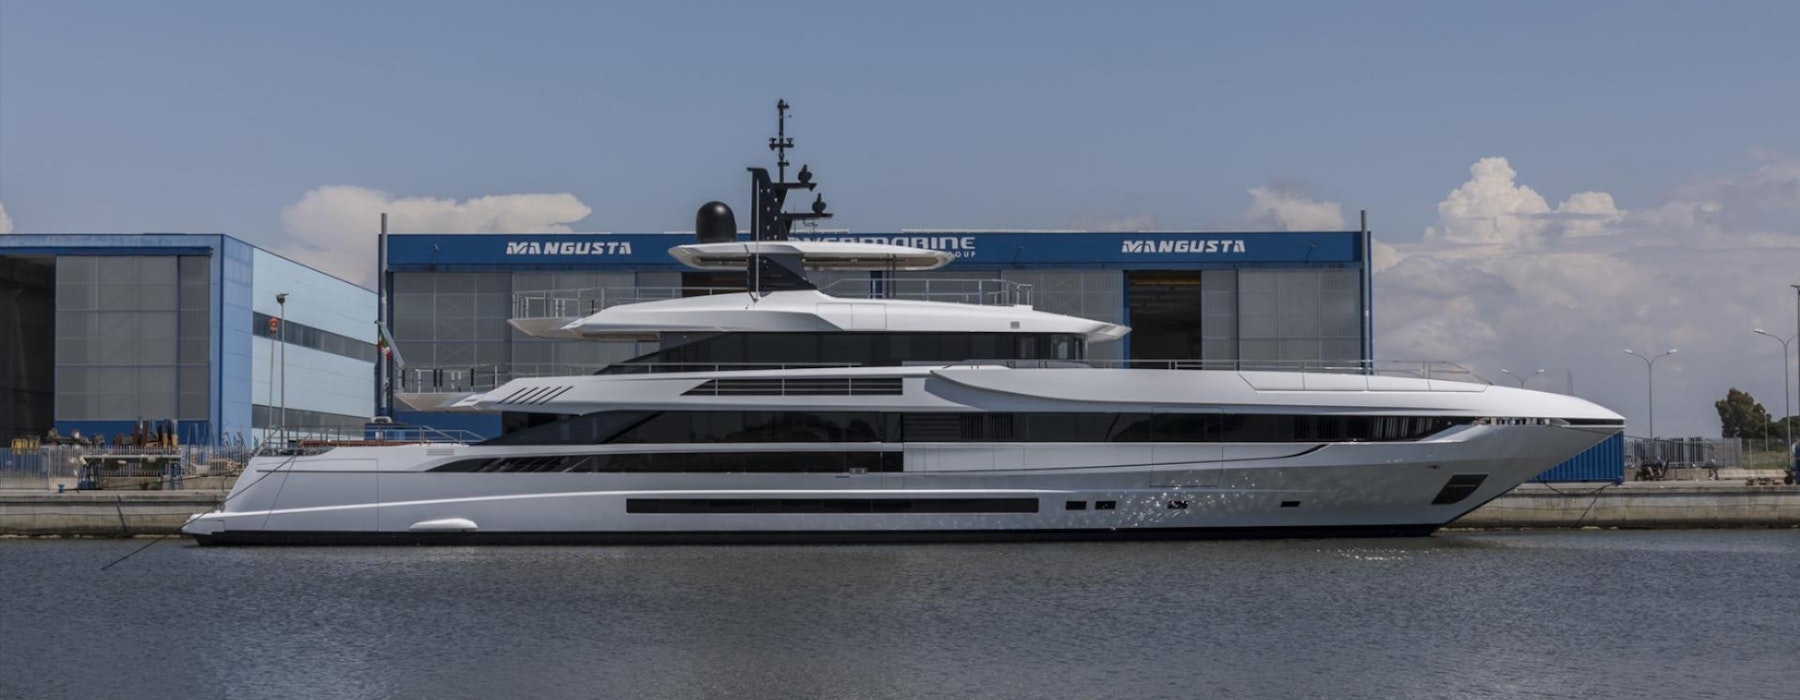 Project ALISA - 164ft (50m) Mangusta Oceano 50 Launched!